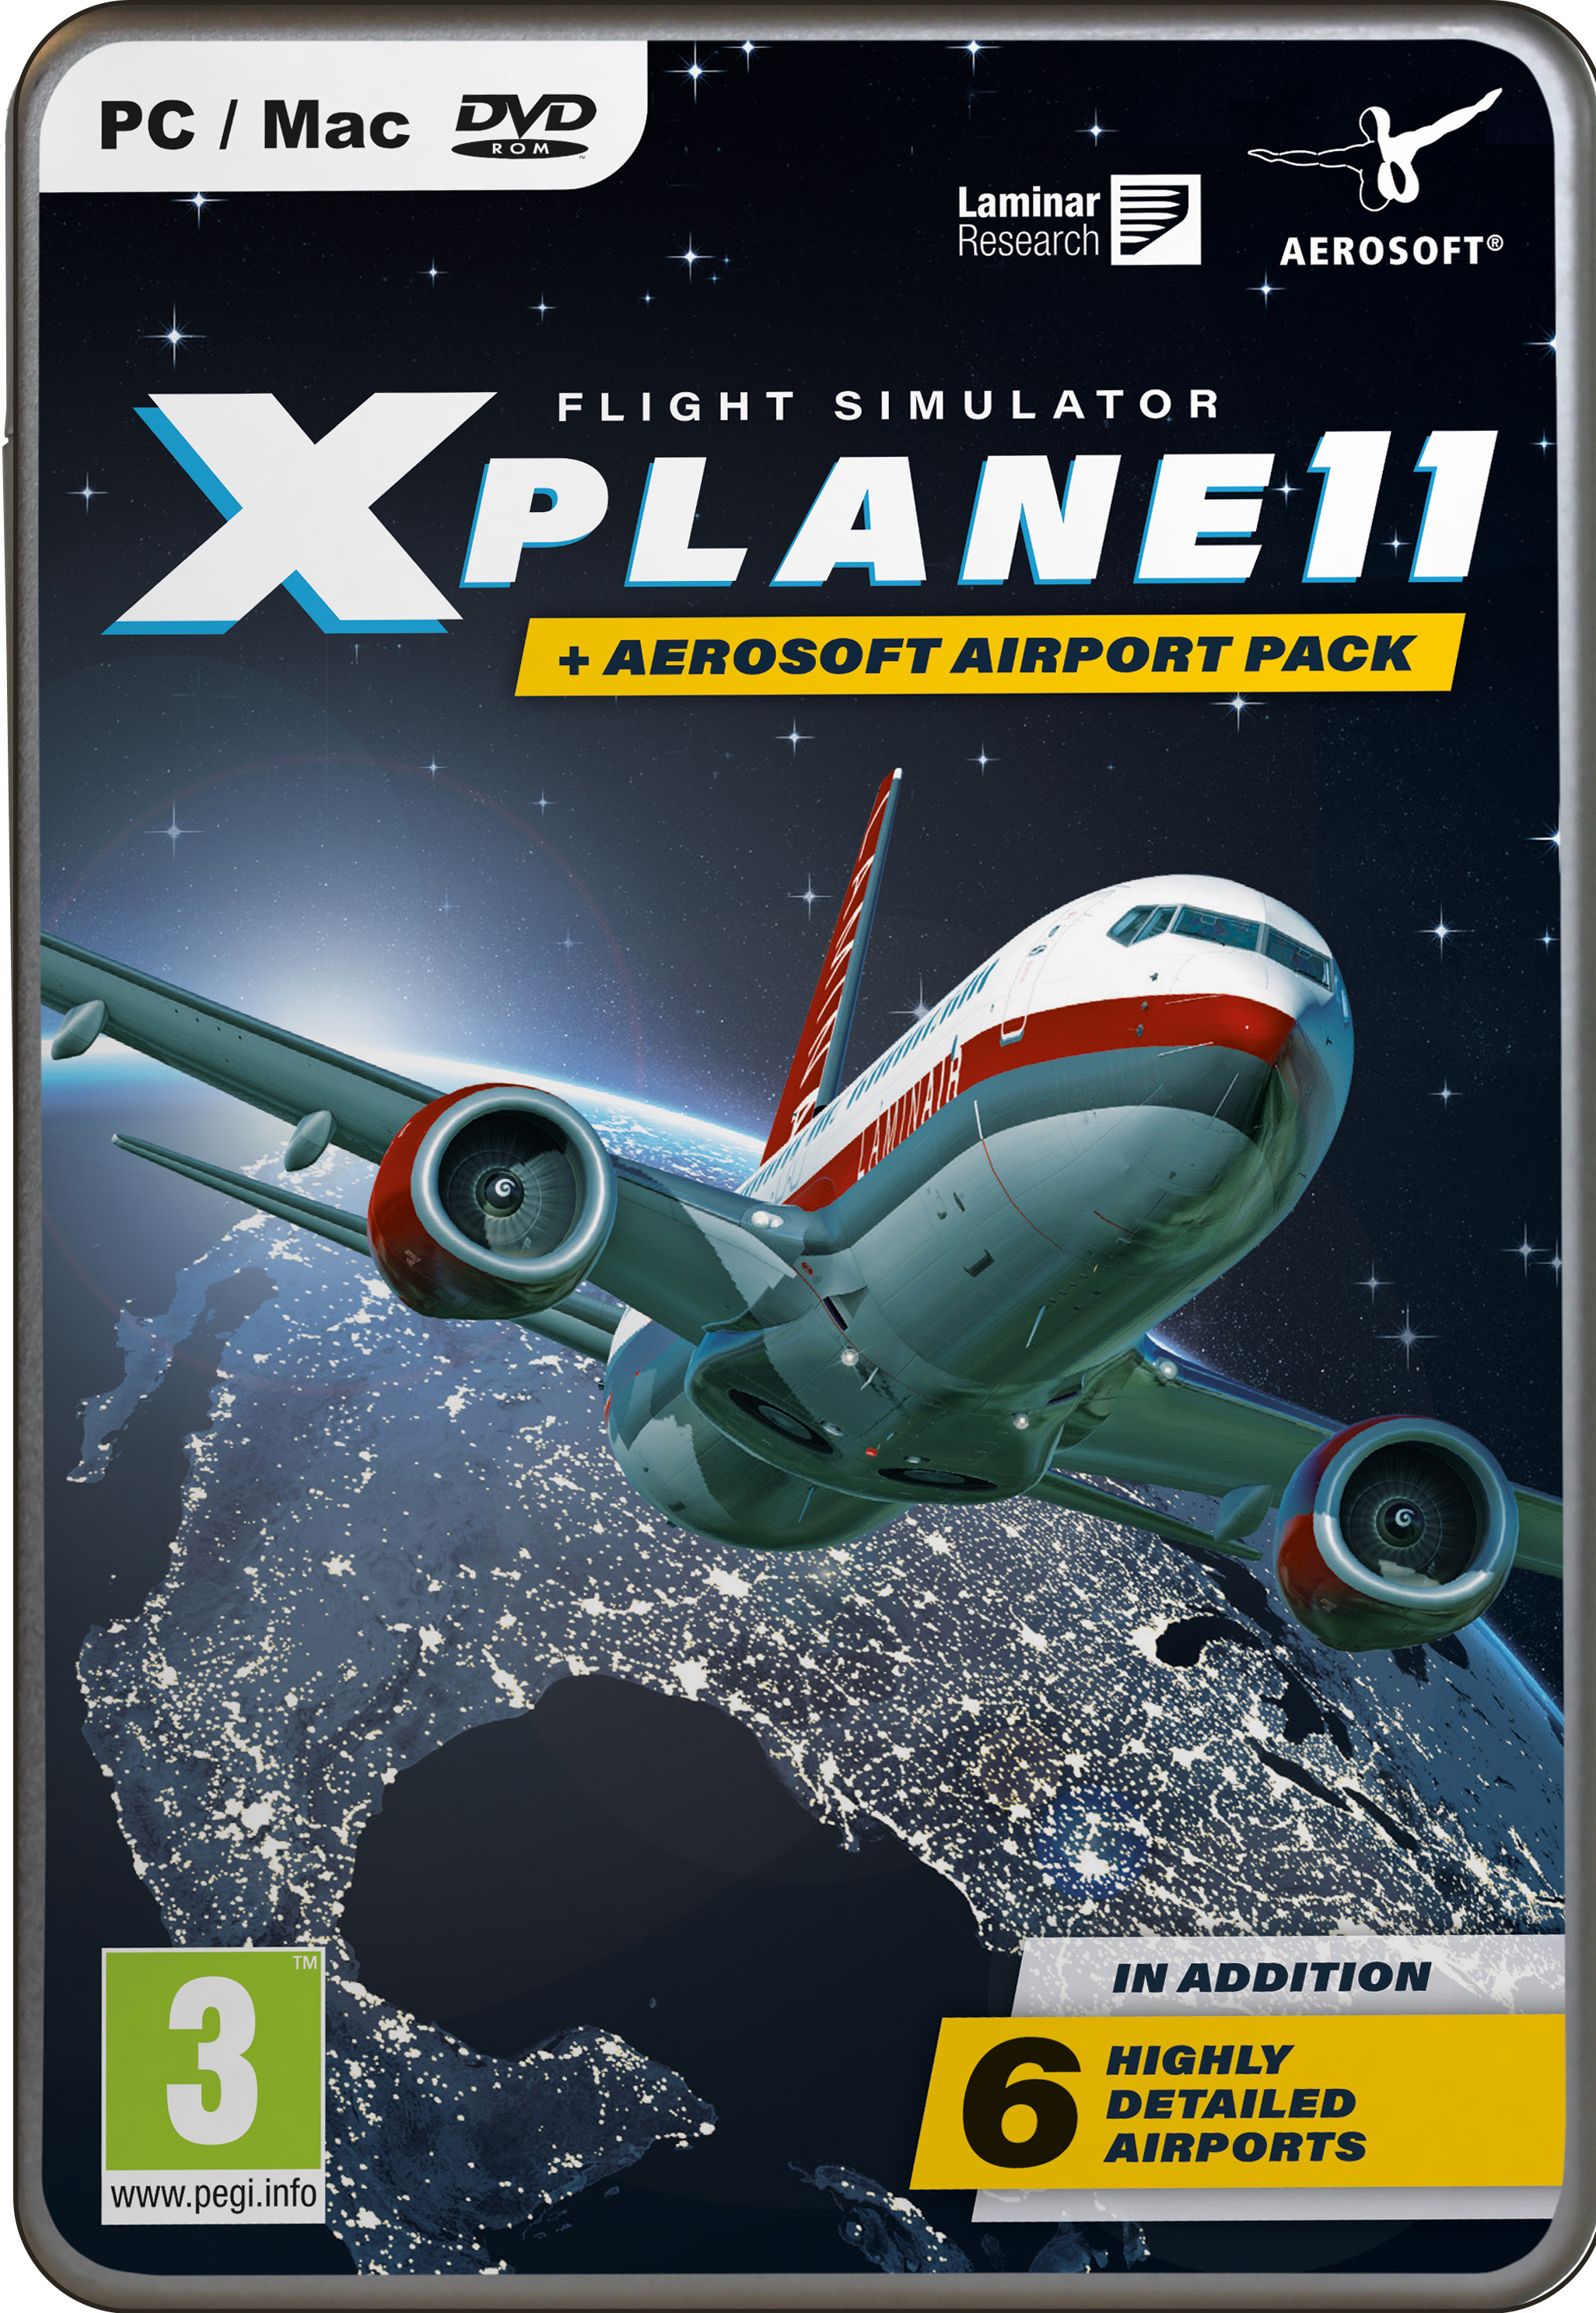 x plane 11android